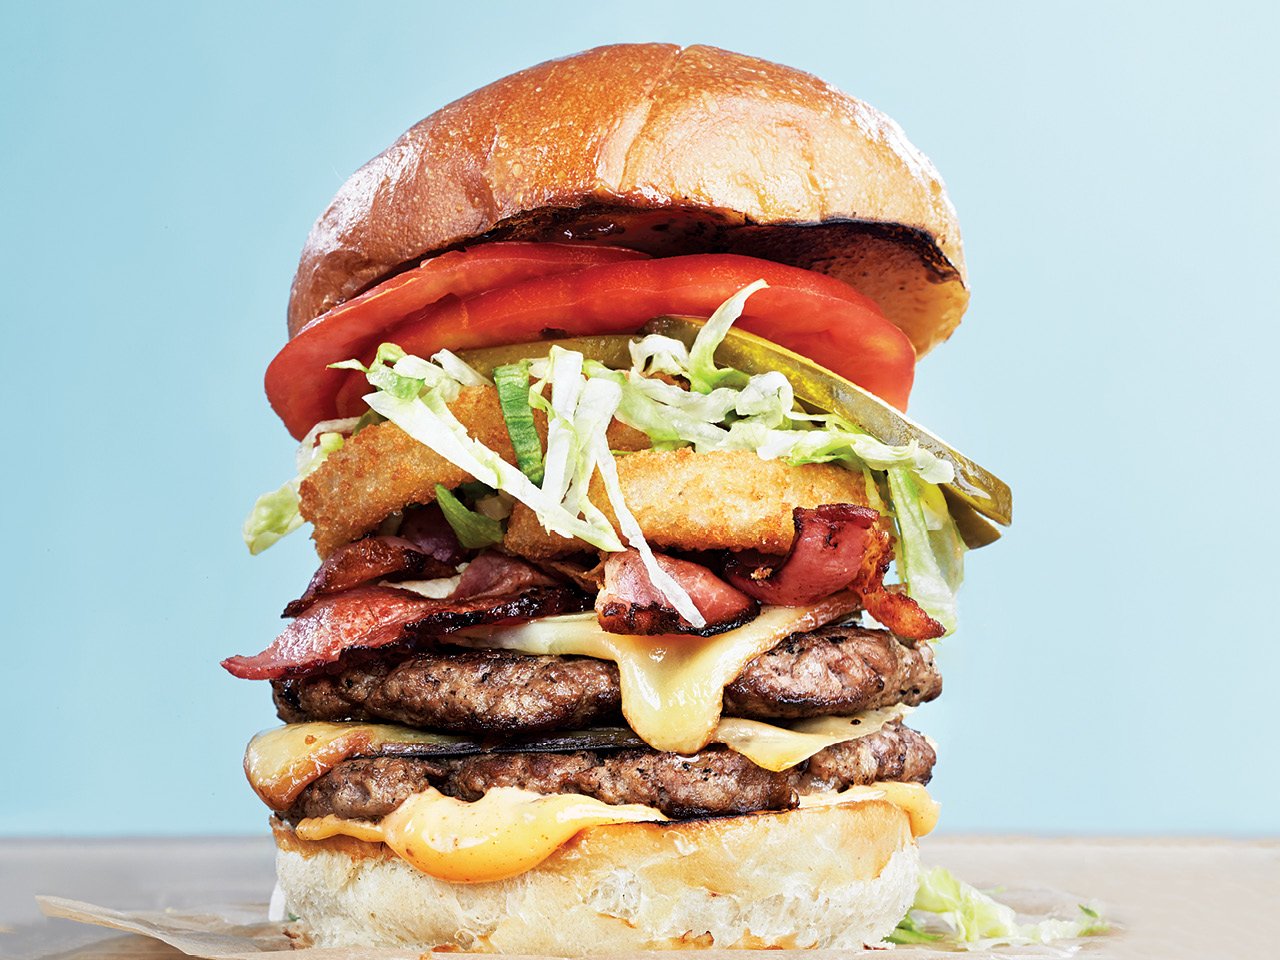 Burger stacked with beef patties, sauces, bacon, onion rings, lettuce, pickles and tomatoes.